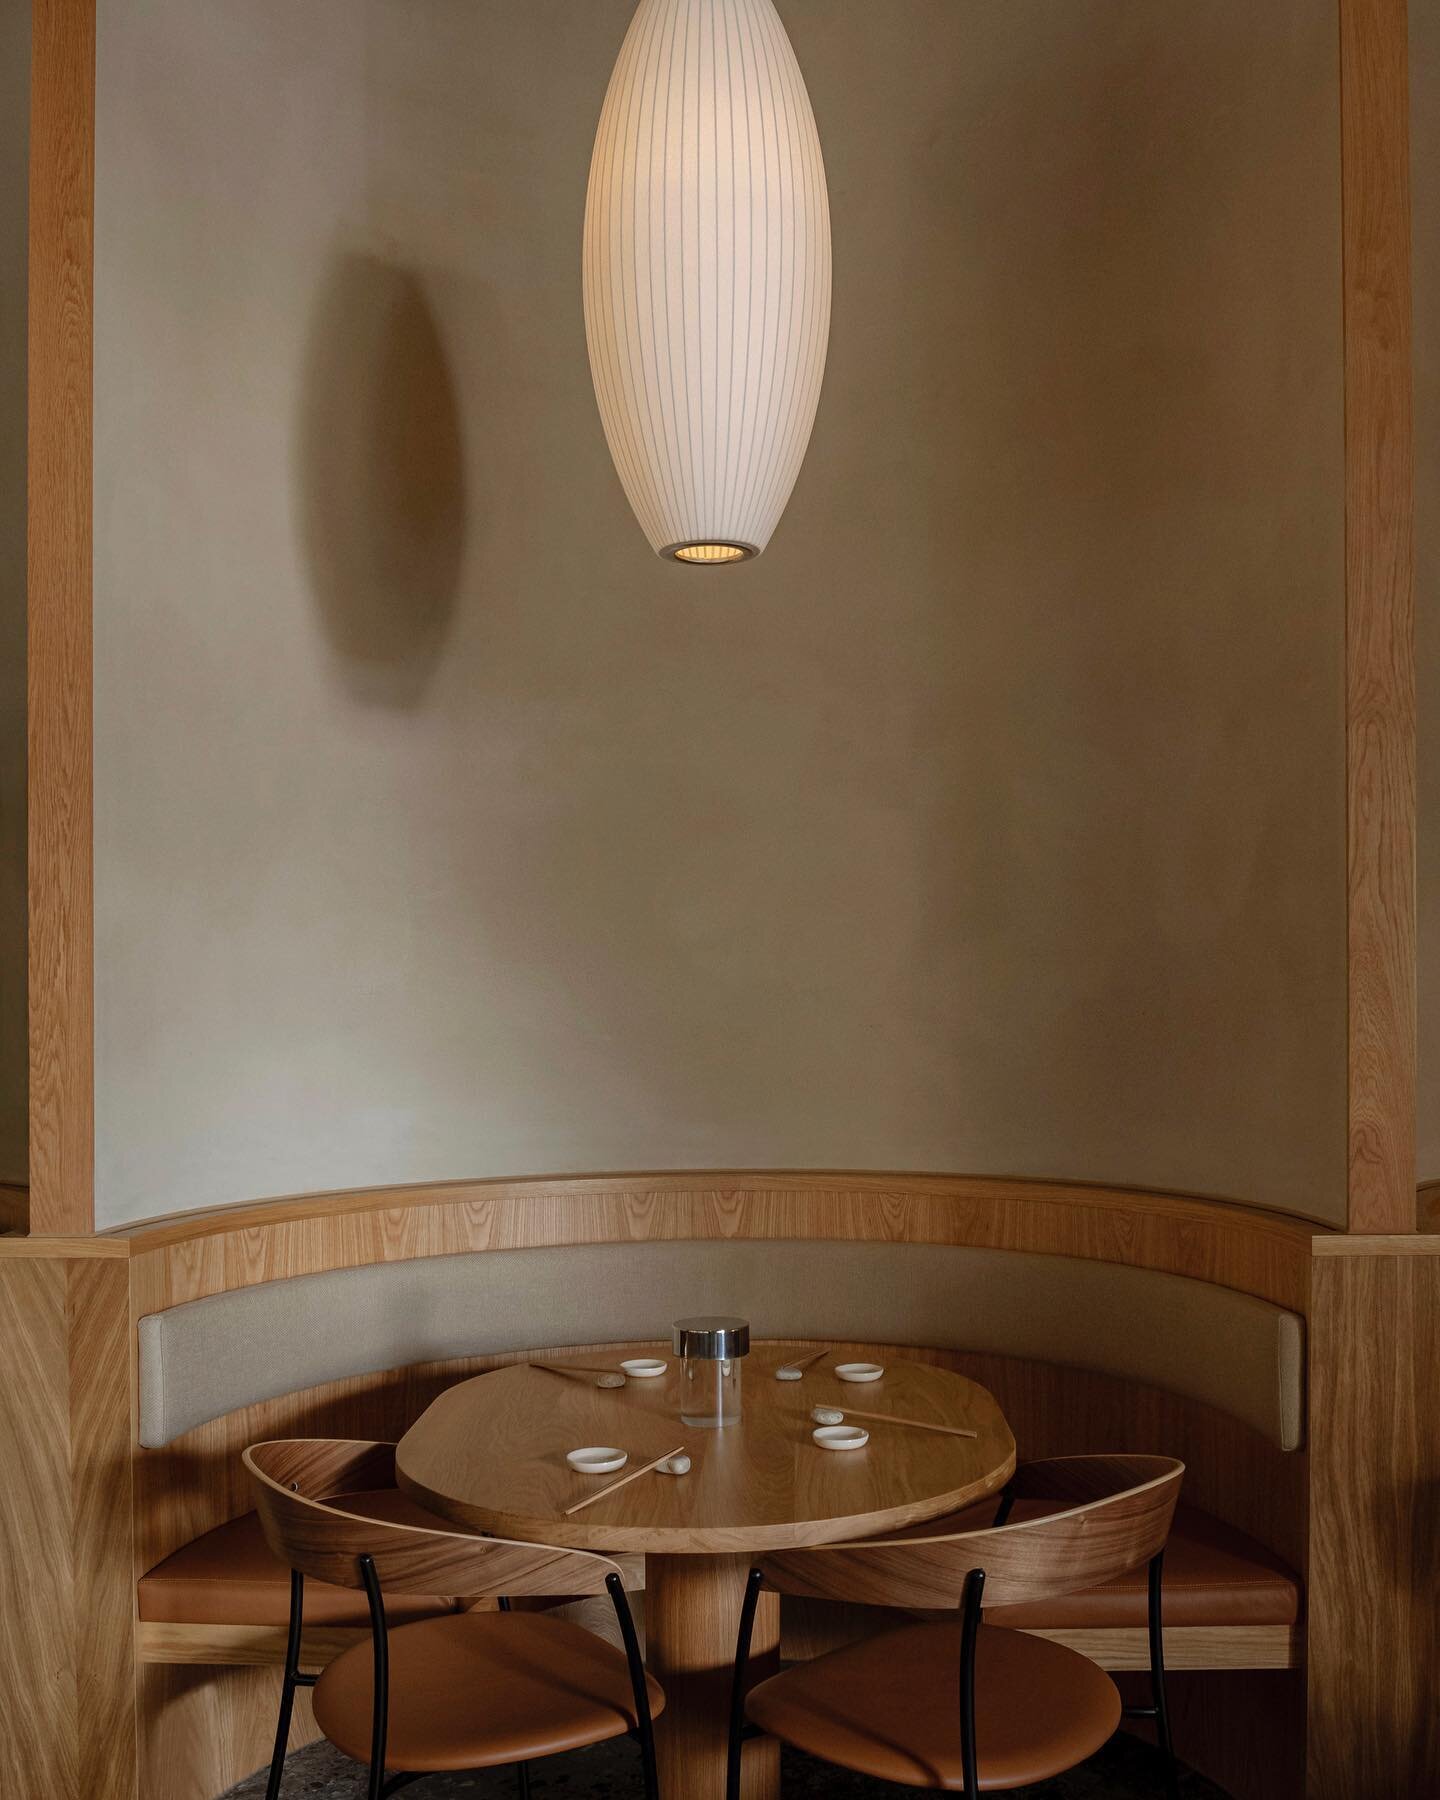 The rear scalloped wall finished in a sandy coloured clay and edged with oak is an elegant architectural expression that creates a dynamic focal point and a natural cocooning for group dining. The built-in seating is paired with custom-made oak table